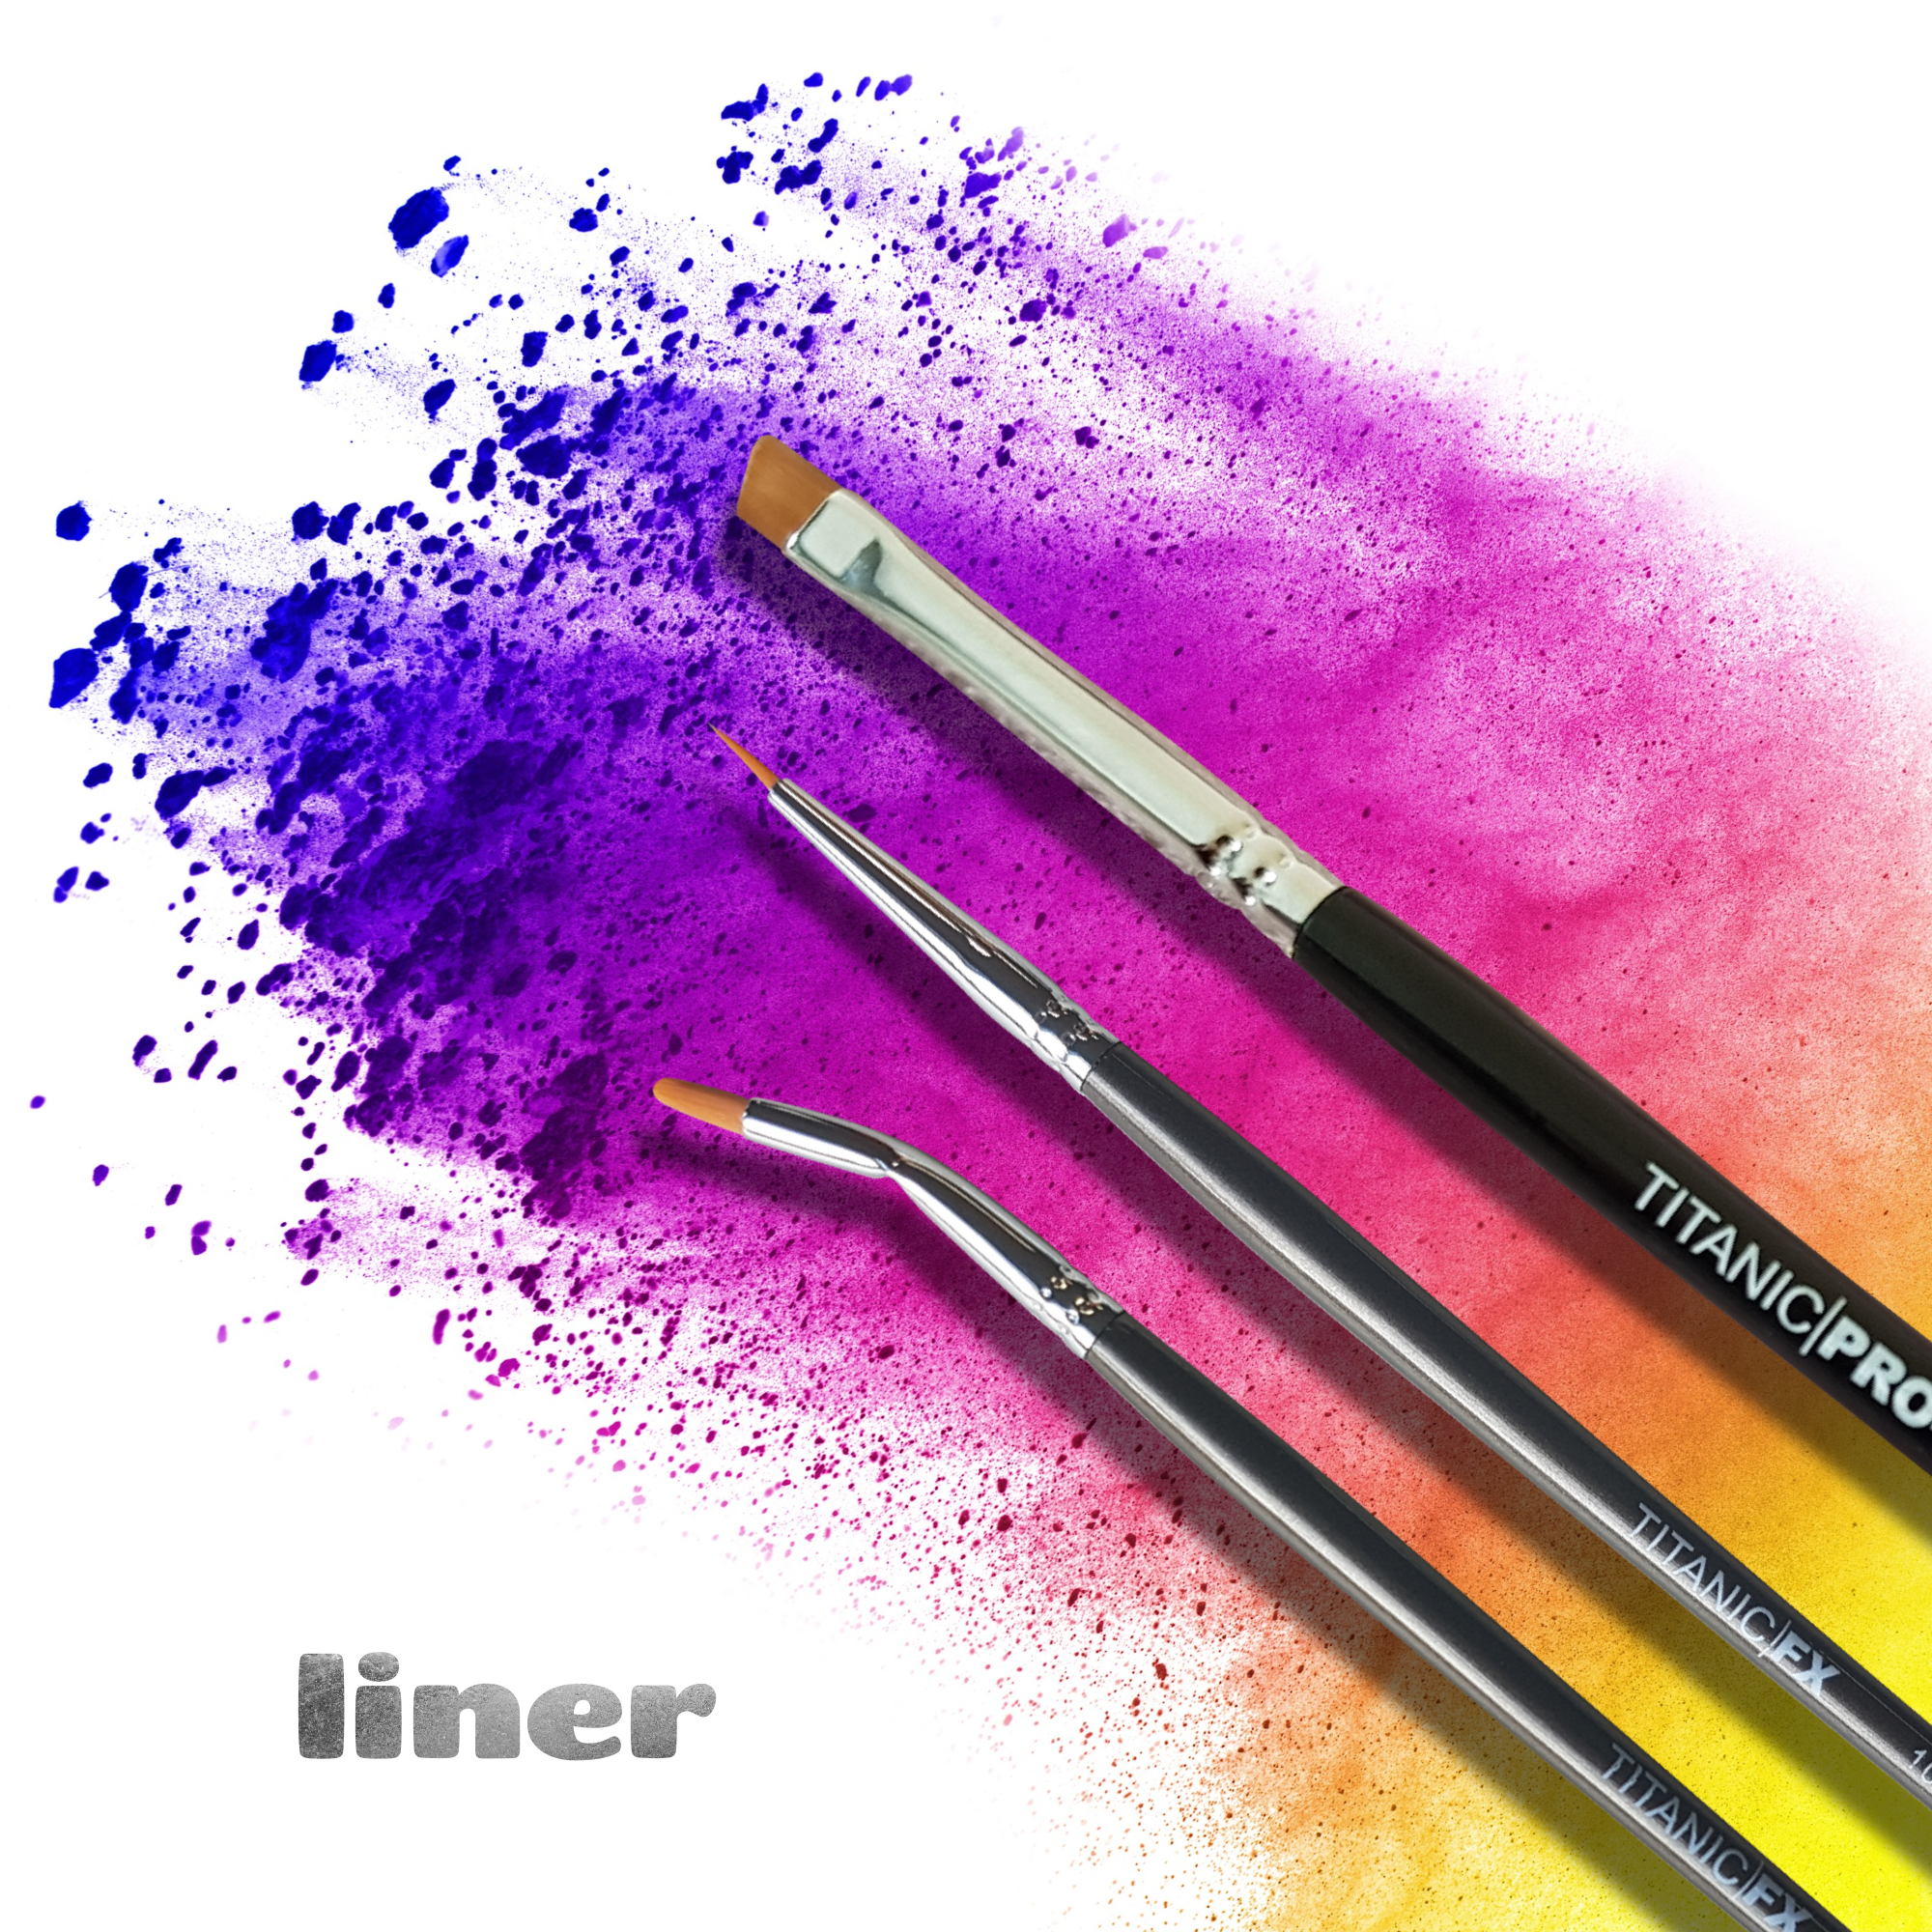 The Liner Makeup Brush Collection